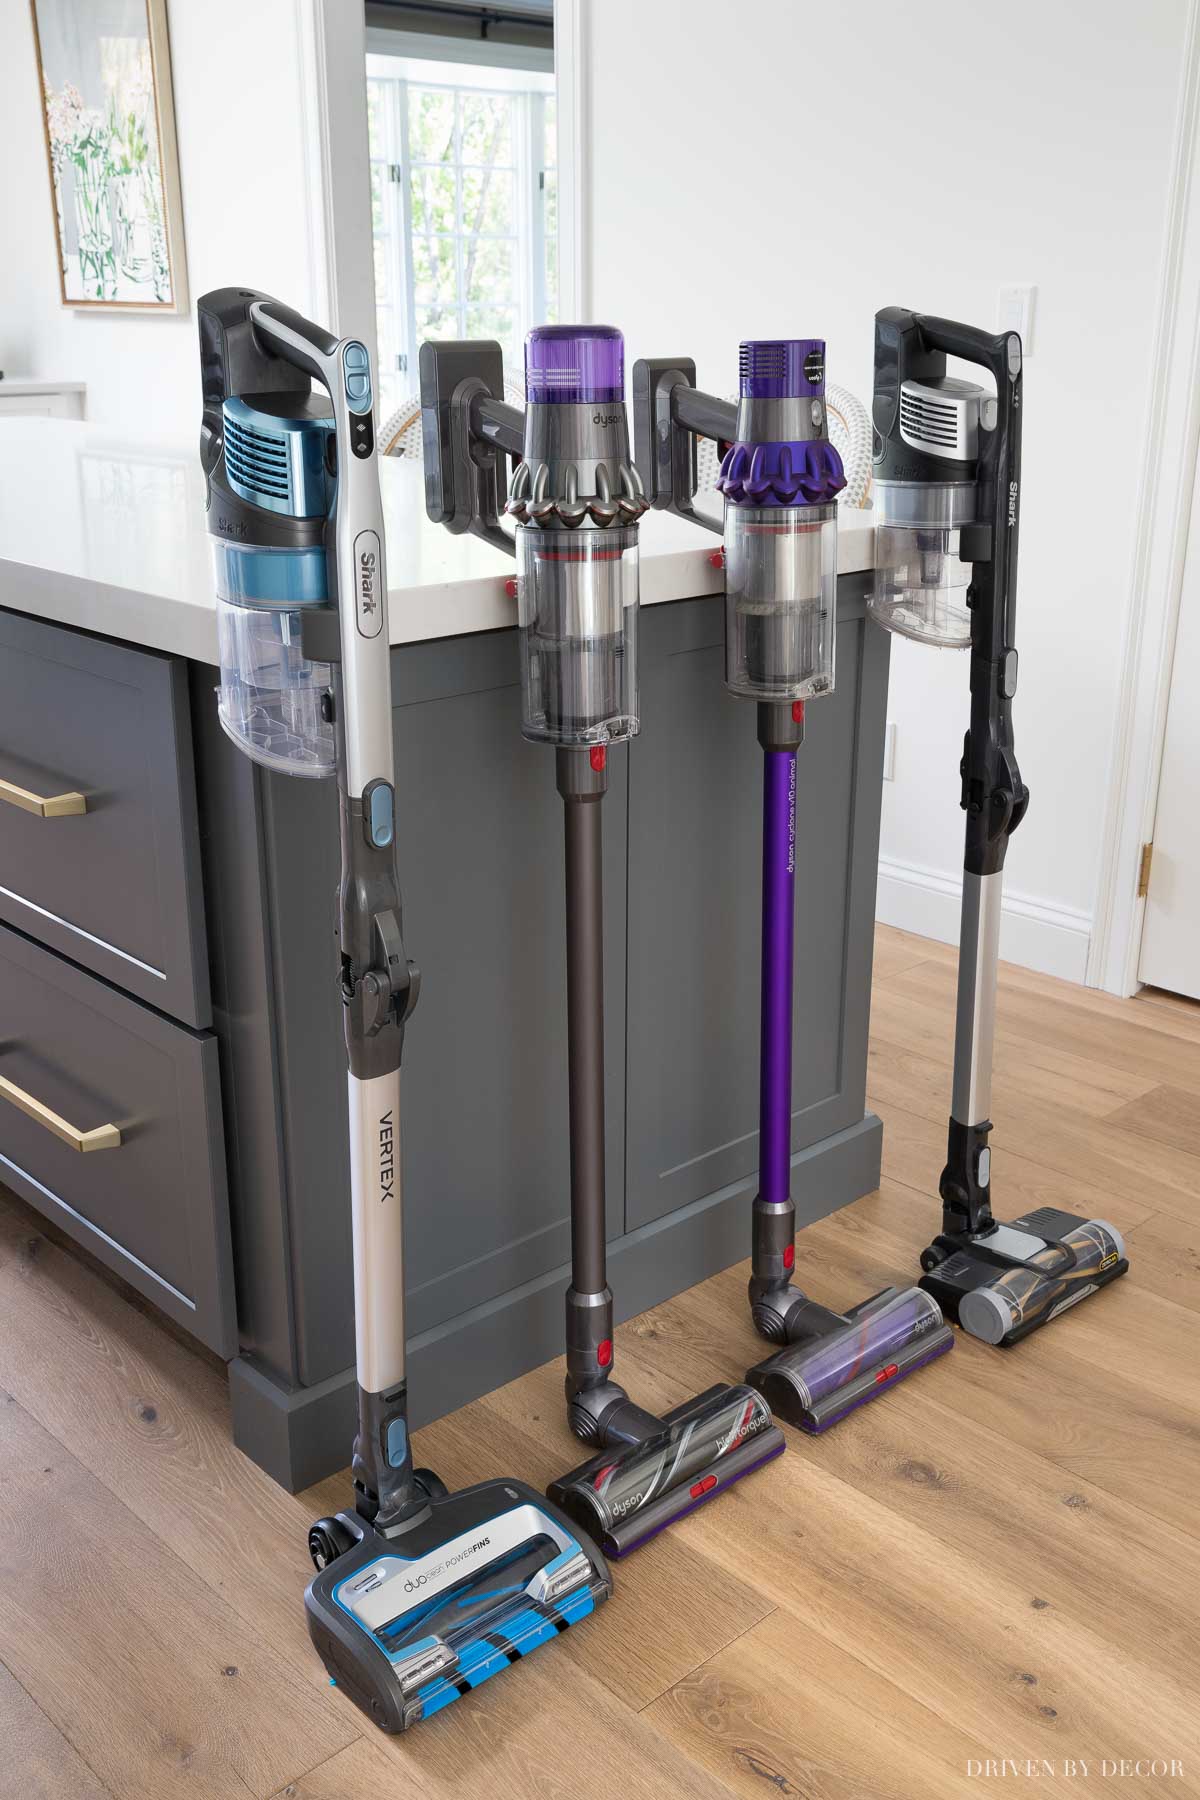 Favorite cleaning tools: Dyson and Shark cordless vacuums